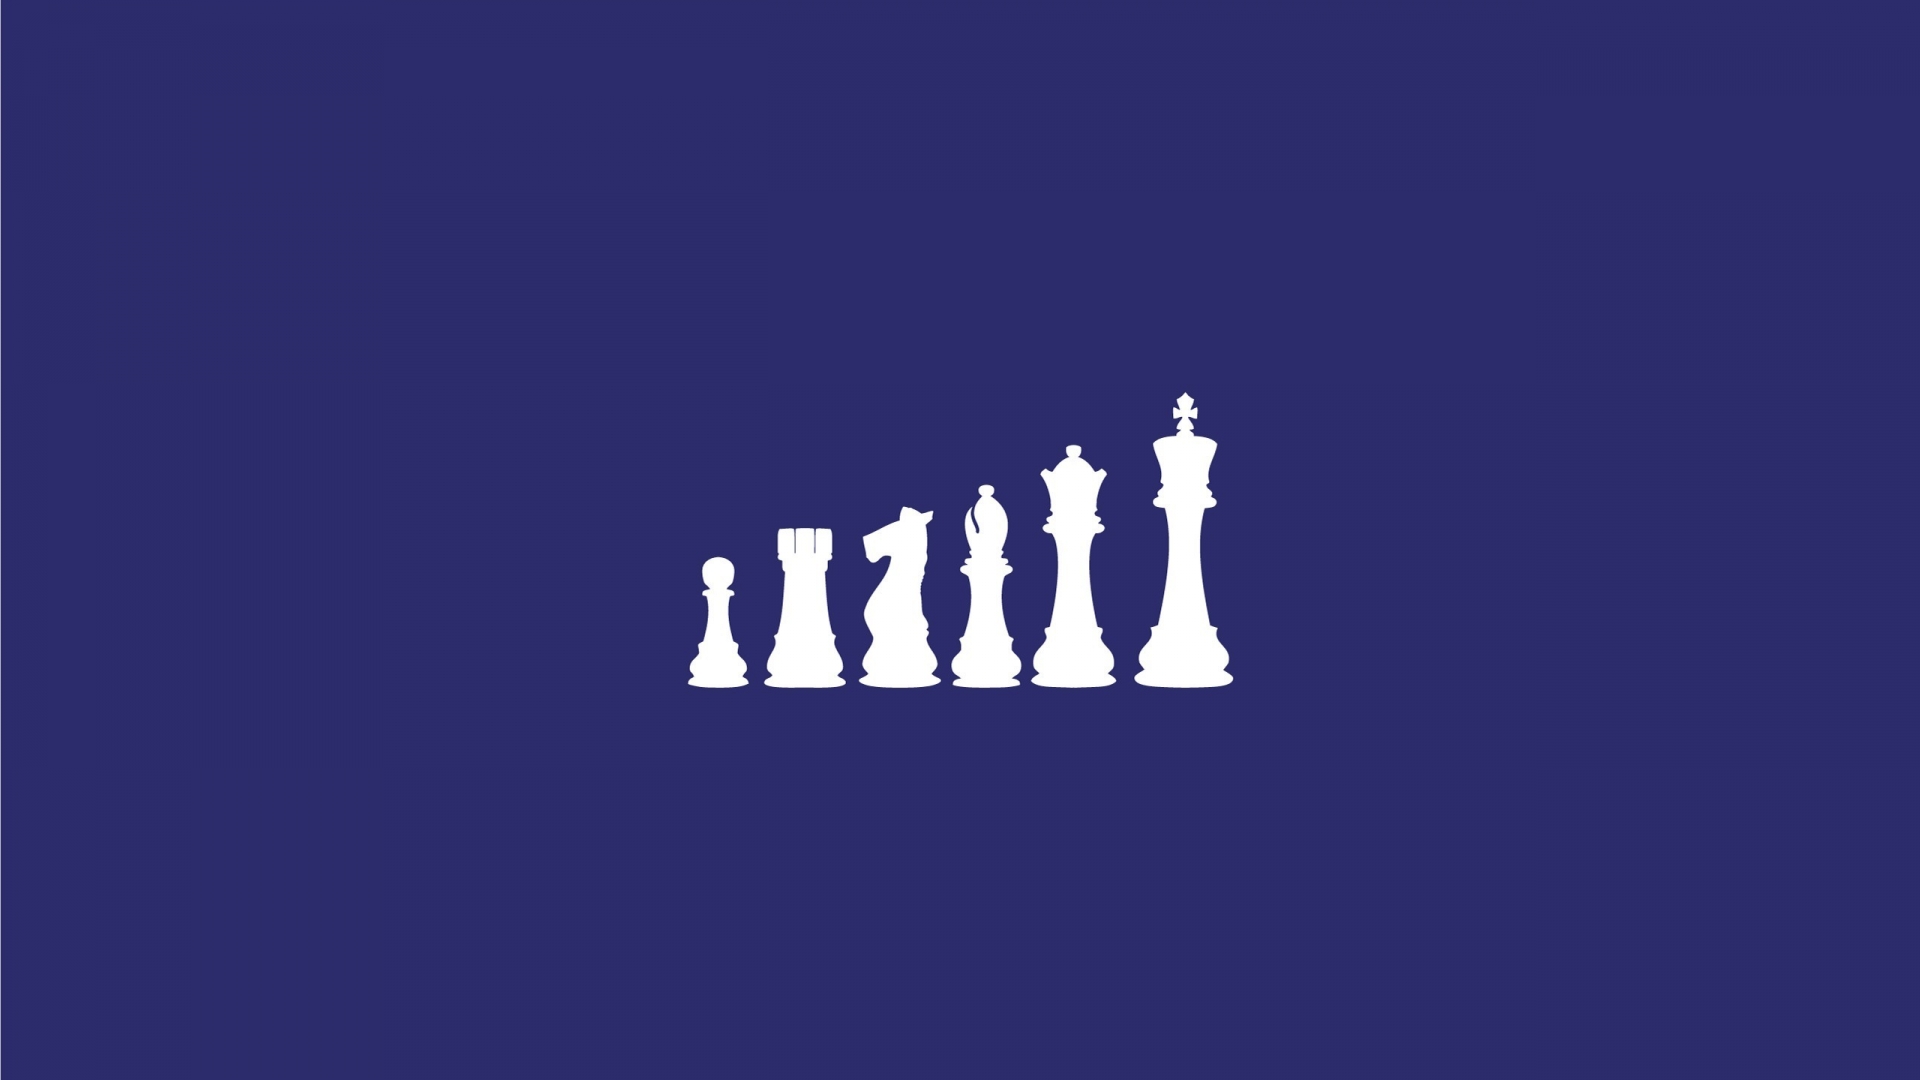 Chess Figures for 1920 x 1080 HDTV 1080p resolution